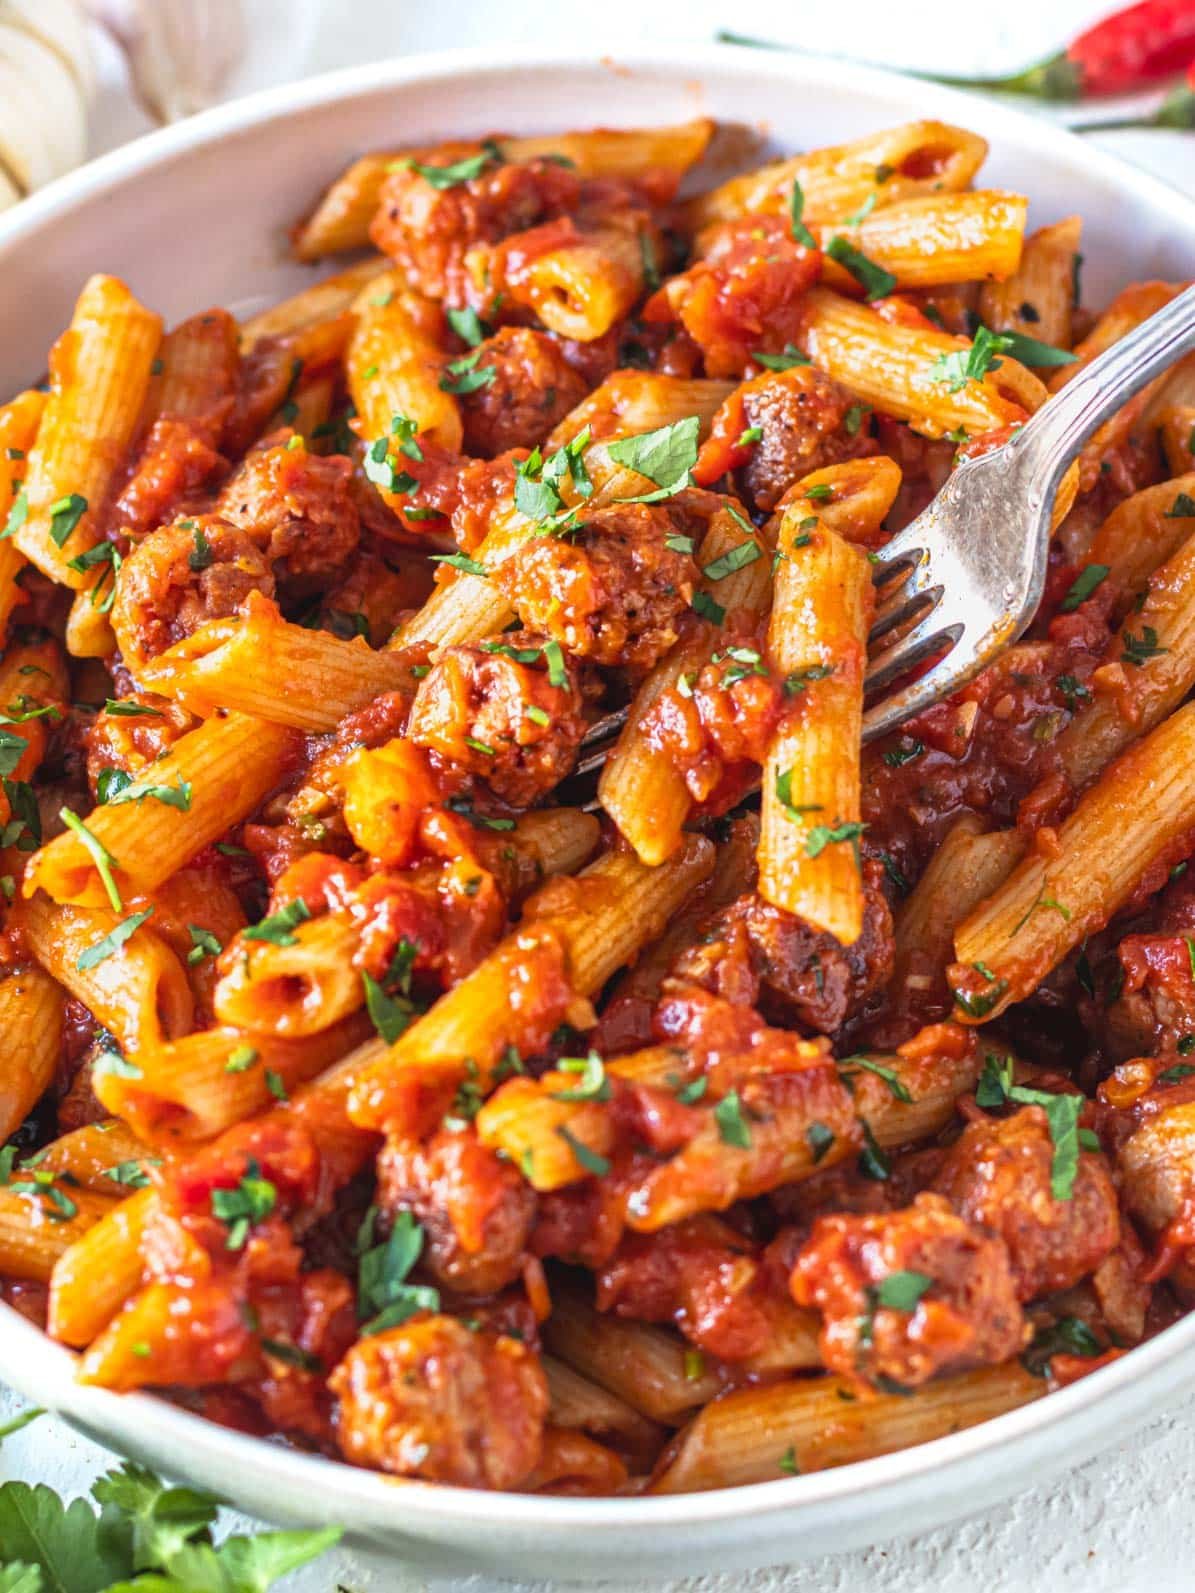 Penne arrabbiata with sausage and a silver fork